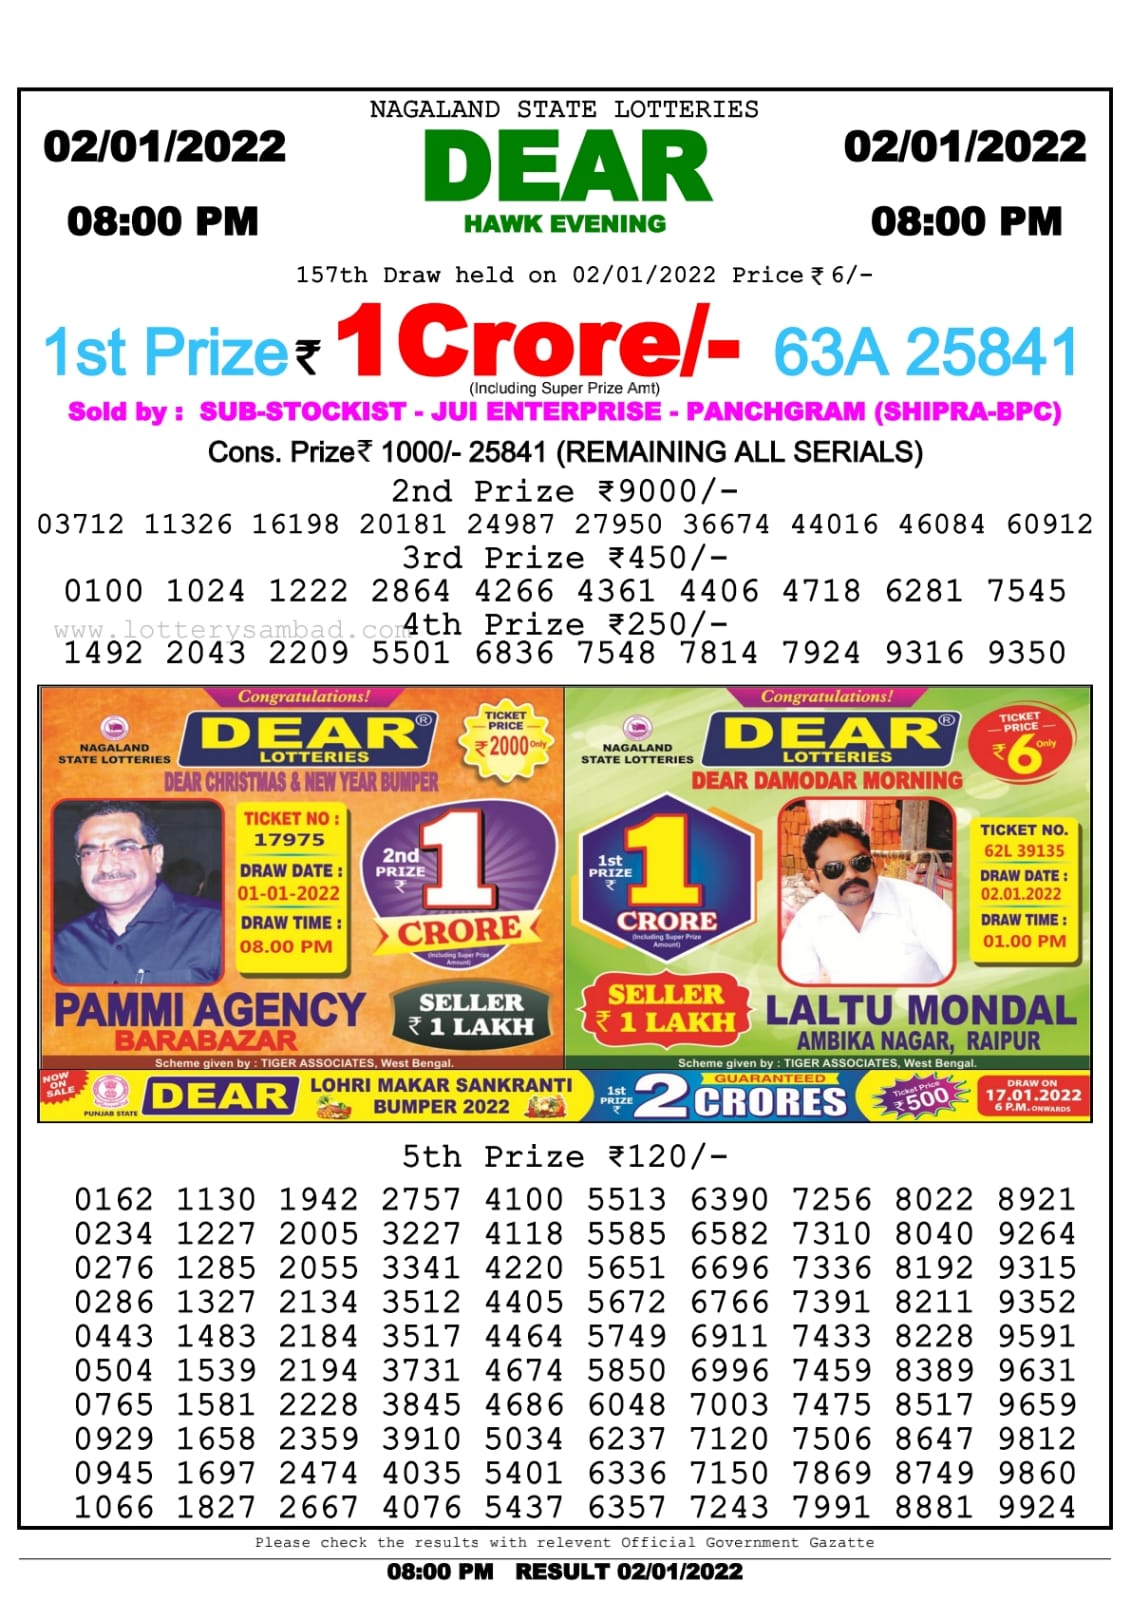 Dear Lottery Nagaland state Lottery Results 8.00 PM 02/01/2022